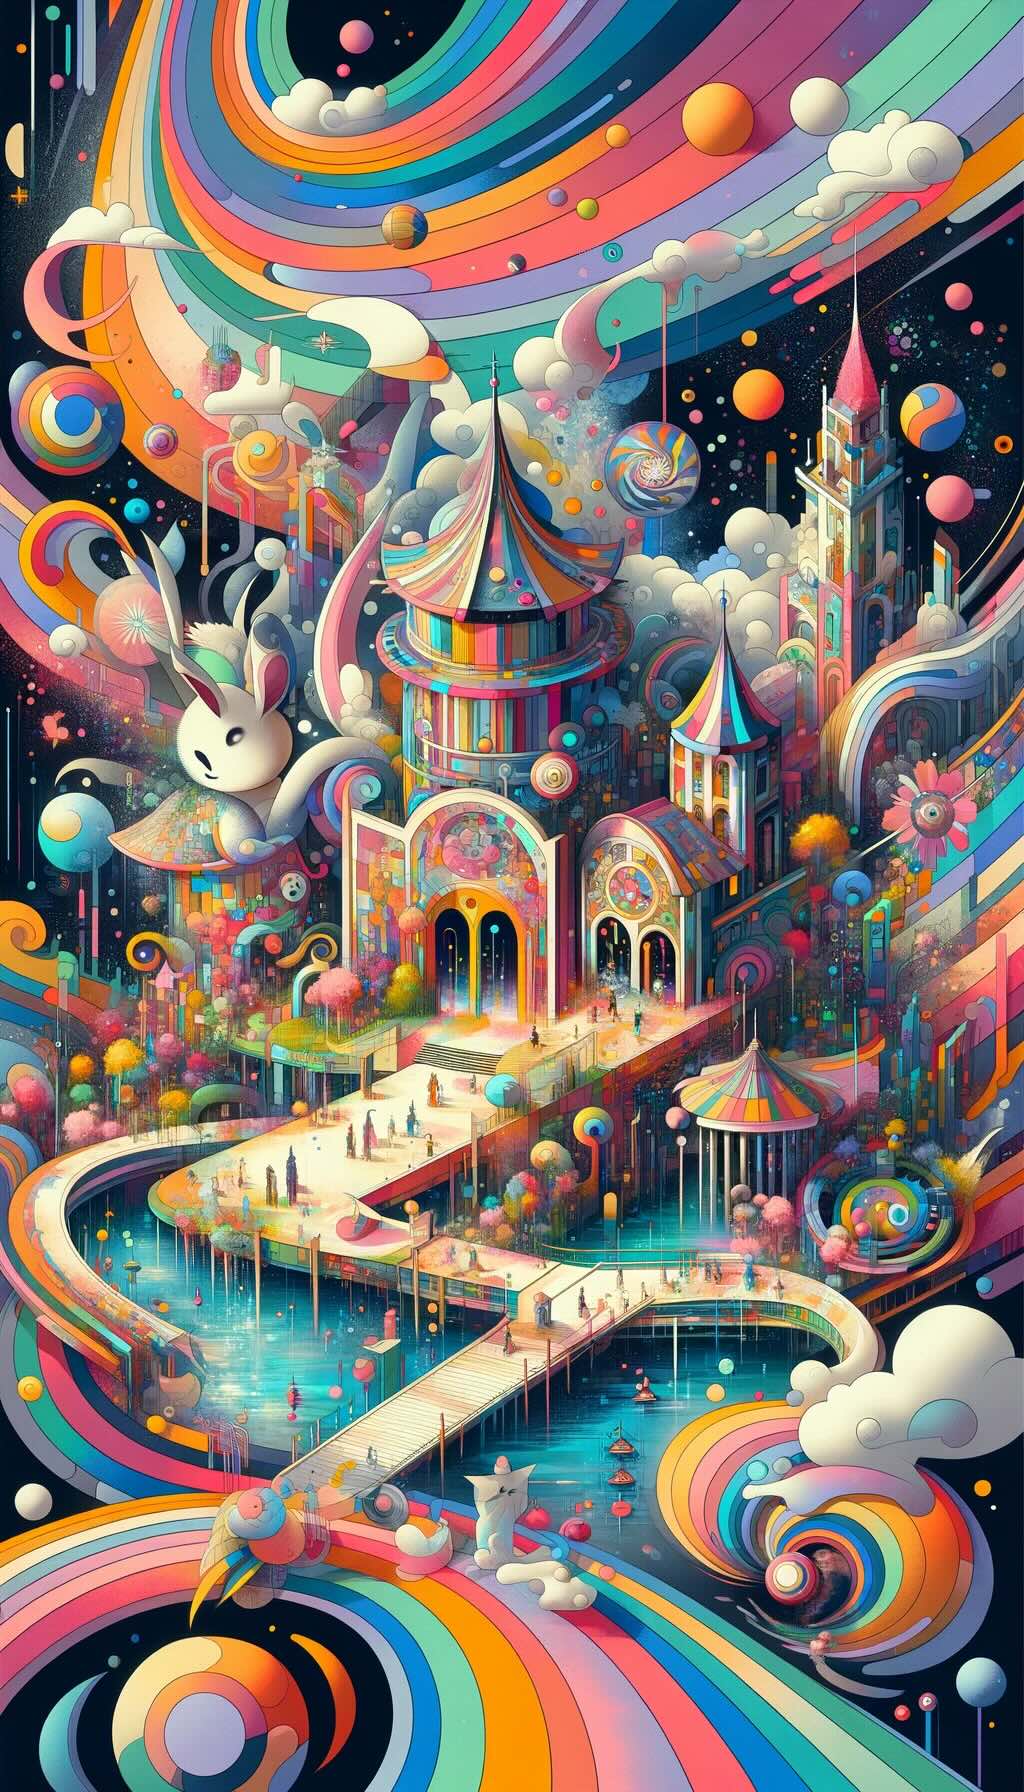 Whimsical and enchanting theme parks in Japan, focusing on the concept of parks that blend animation and fantasy themes. It visualizes a world where the boundaries between animation and reality blur, featuring elements that represent the imaginative and colorful aspects found in such parks incorporates abstract representations of fantastical structures, magical gardens, and characters that could inhabit these spaces, using vibrant colors, playful shapes, and fragmented perspectives. It conveys the wonder and joy of these unique theme park experiences.